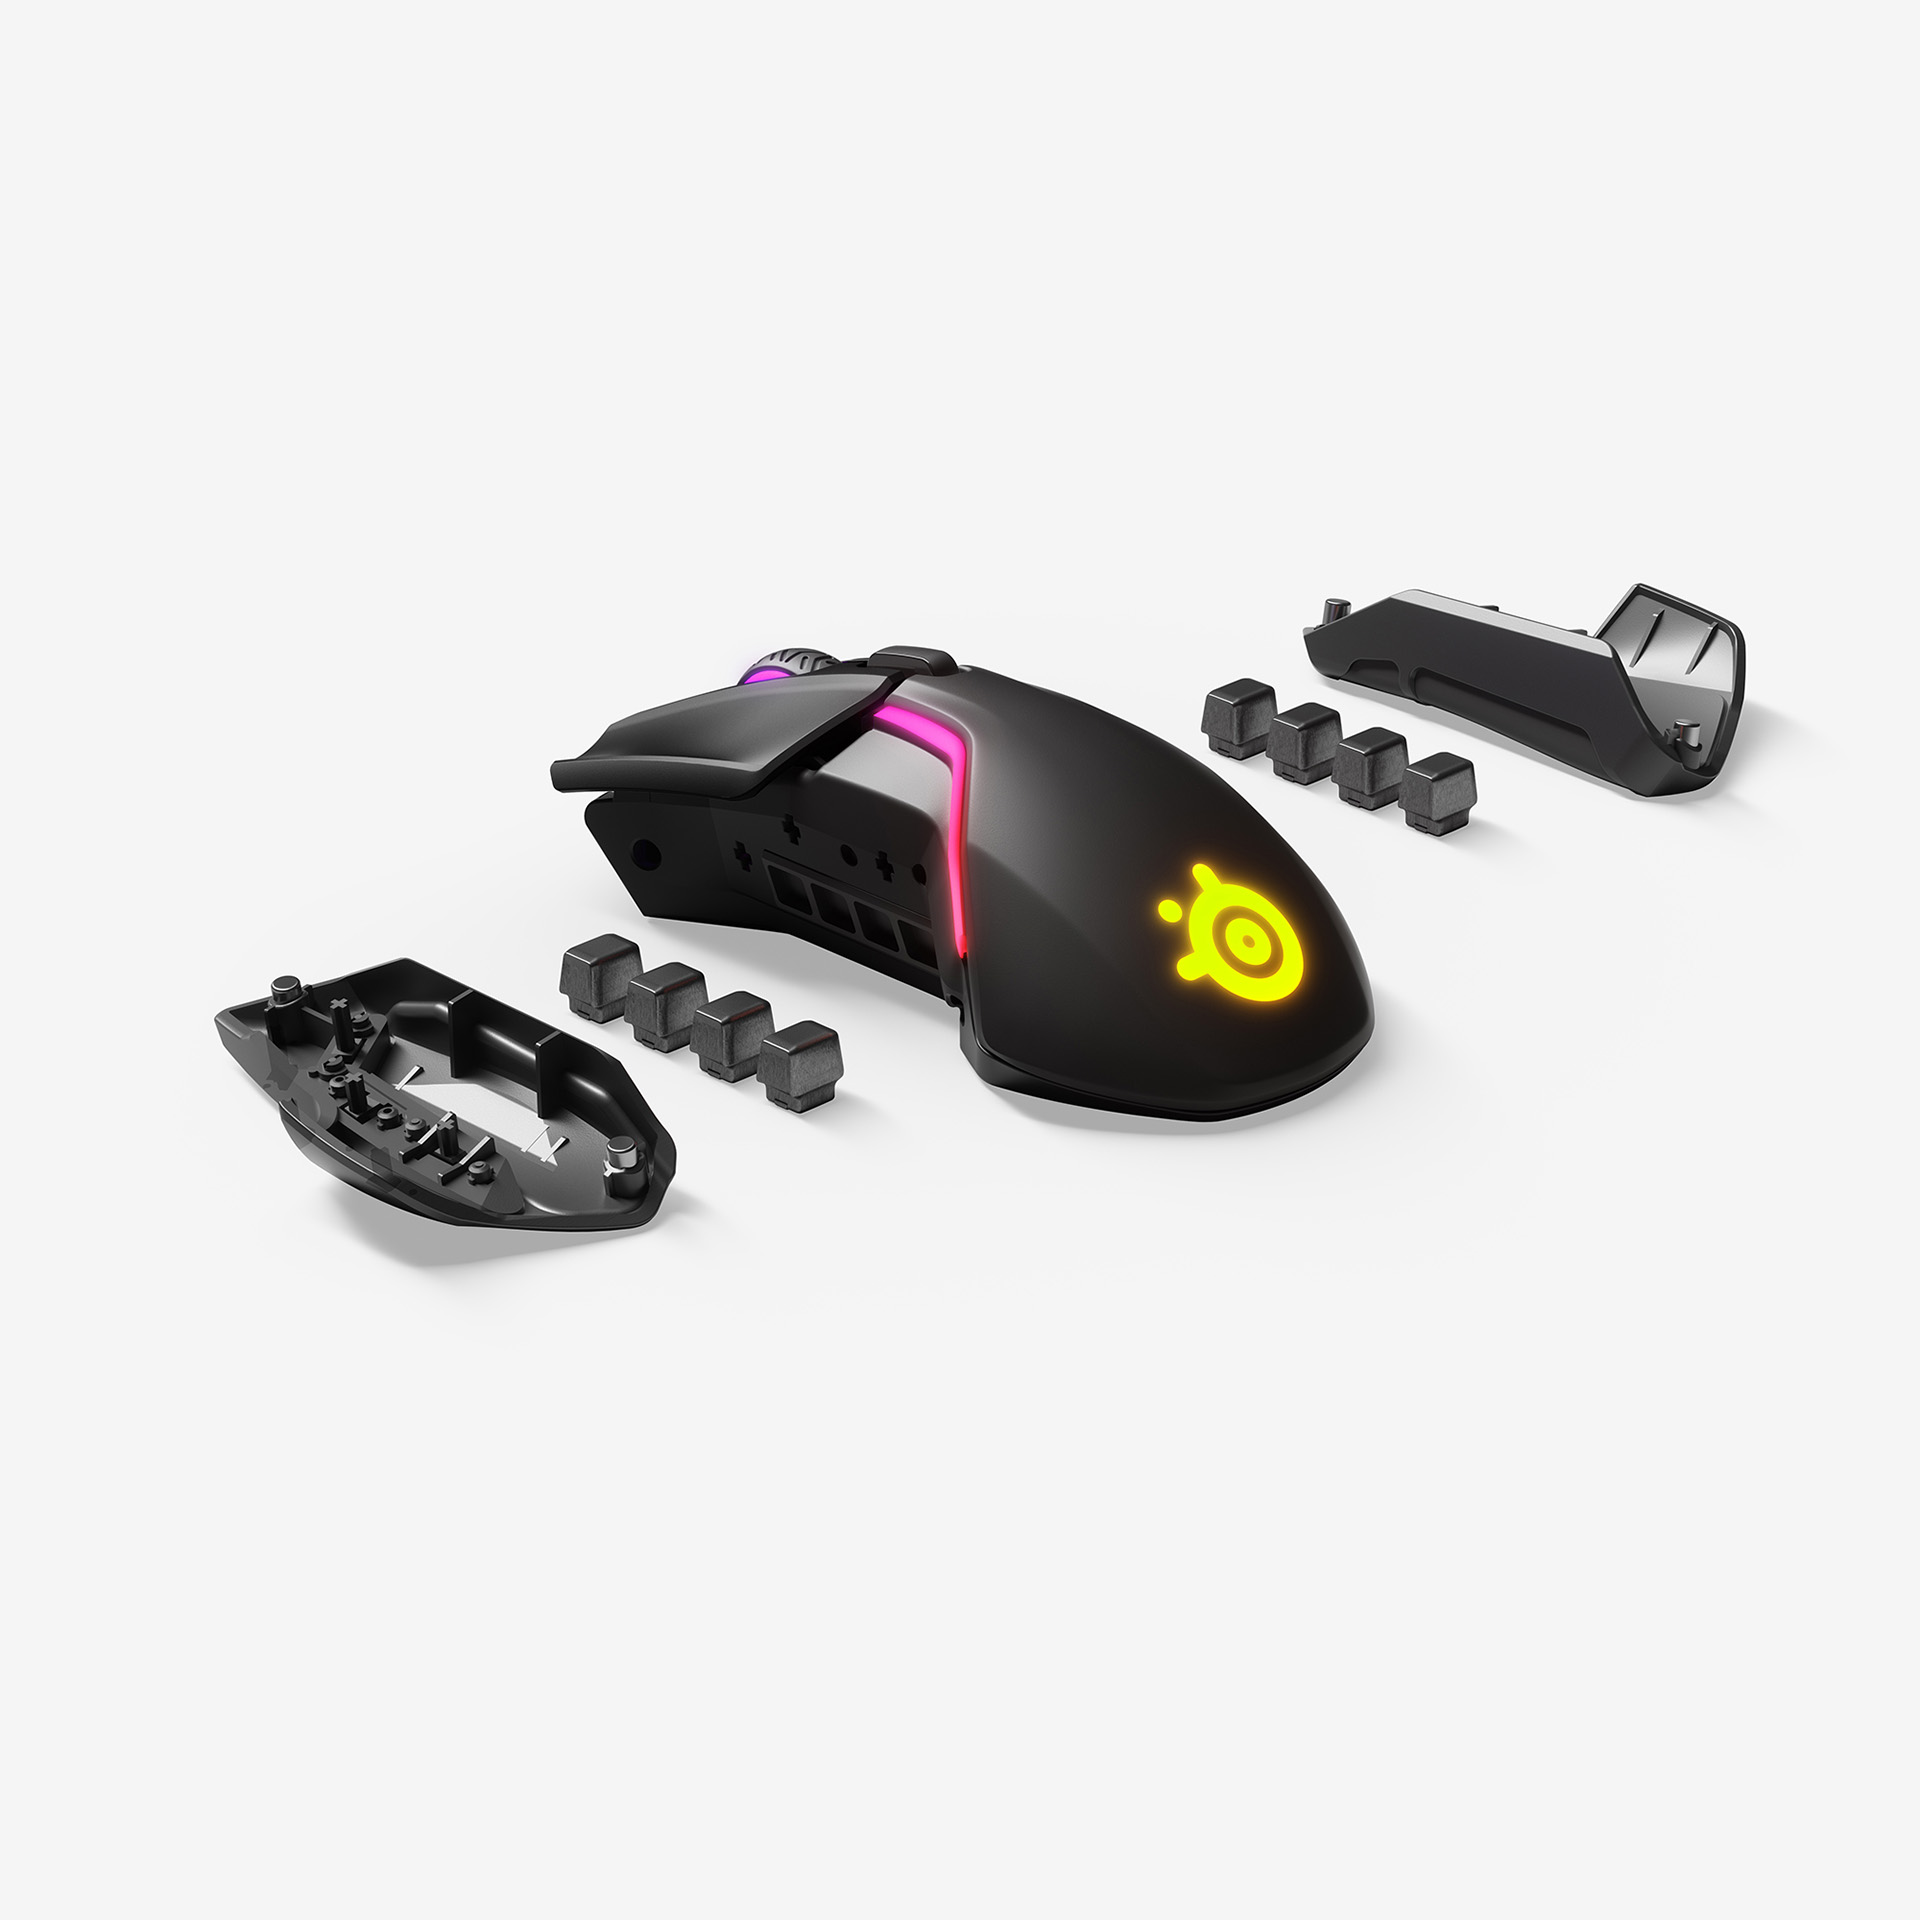 SteelSeries_Rival650_Wireless_Persp_Weights